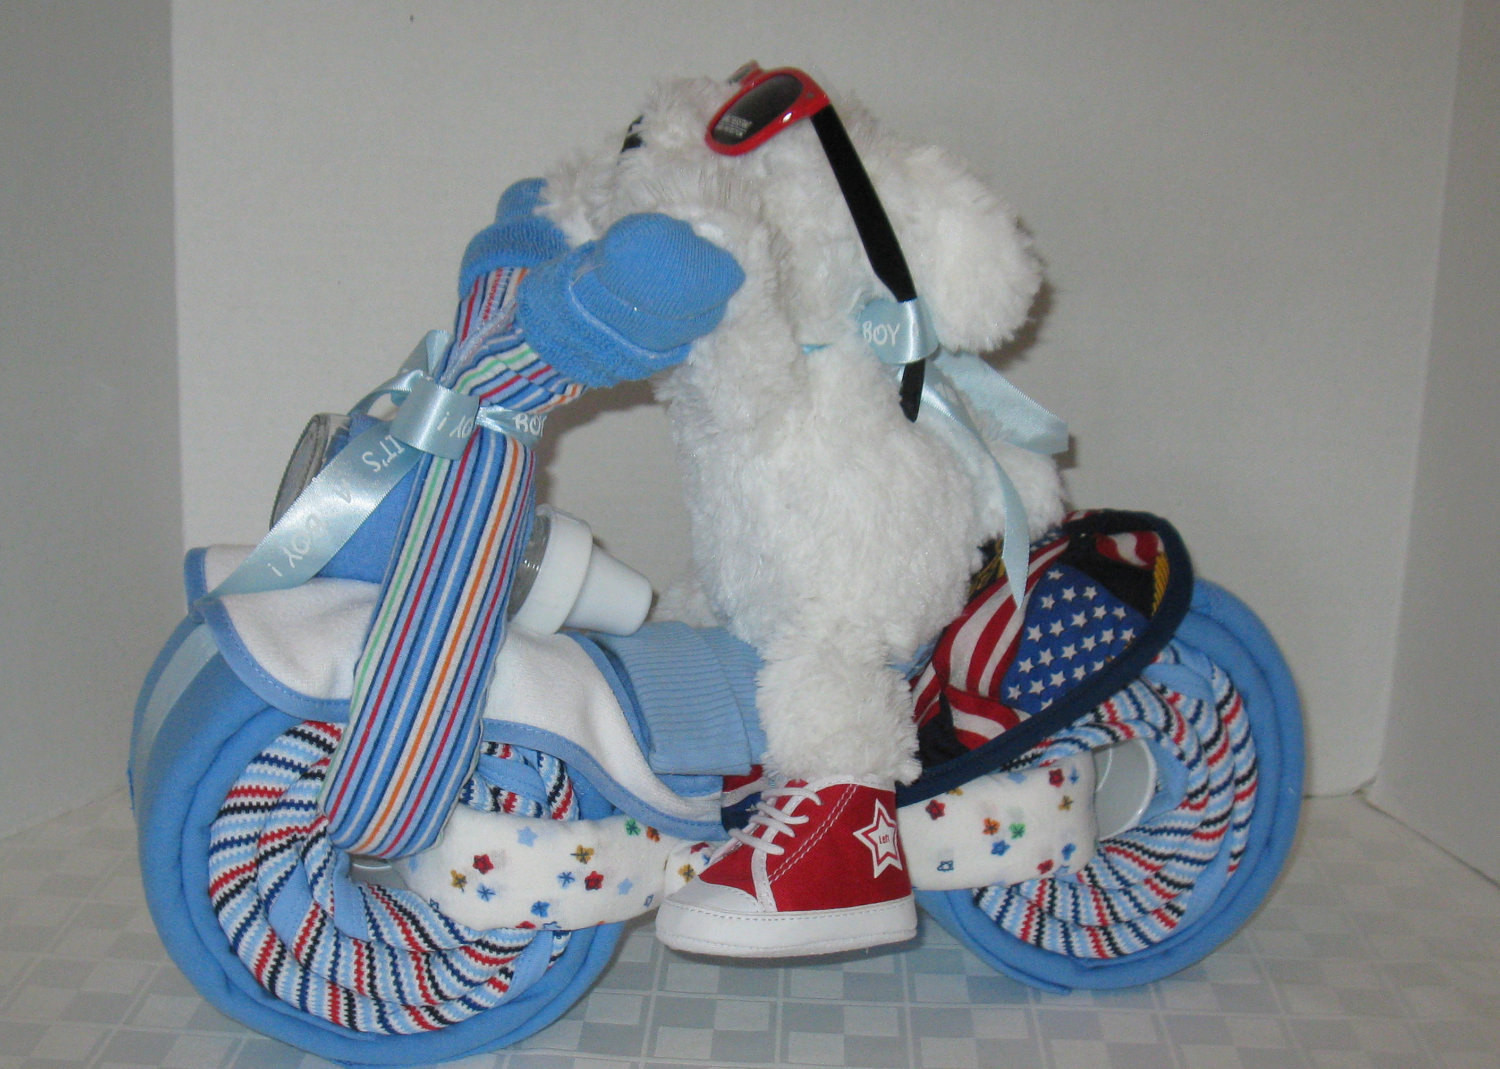 Unique Baby Shower Gift Ideas For Boys
 Motorcycle Bike Diaper Cake Baby Shower Gift by